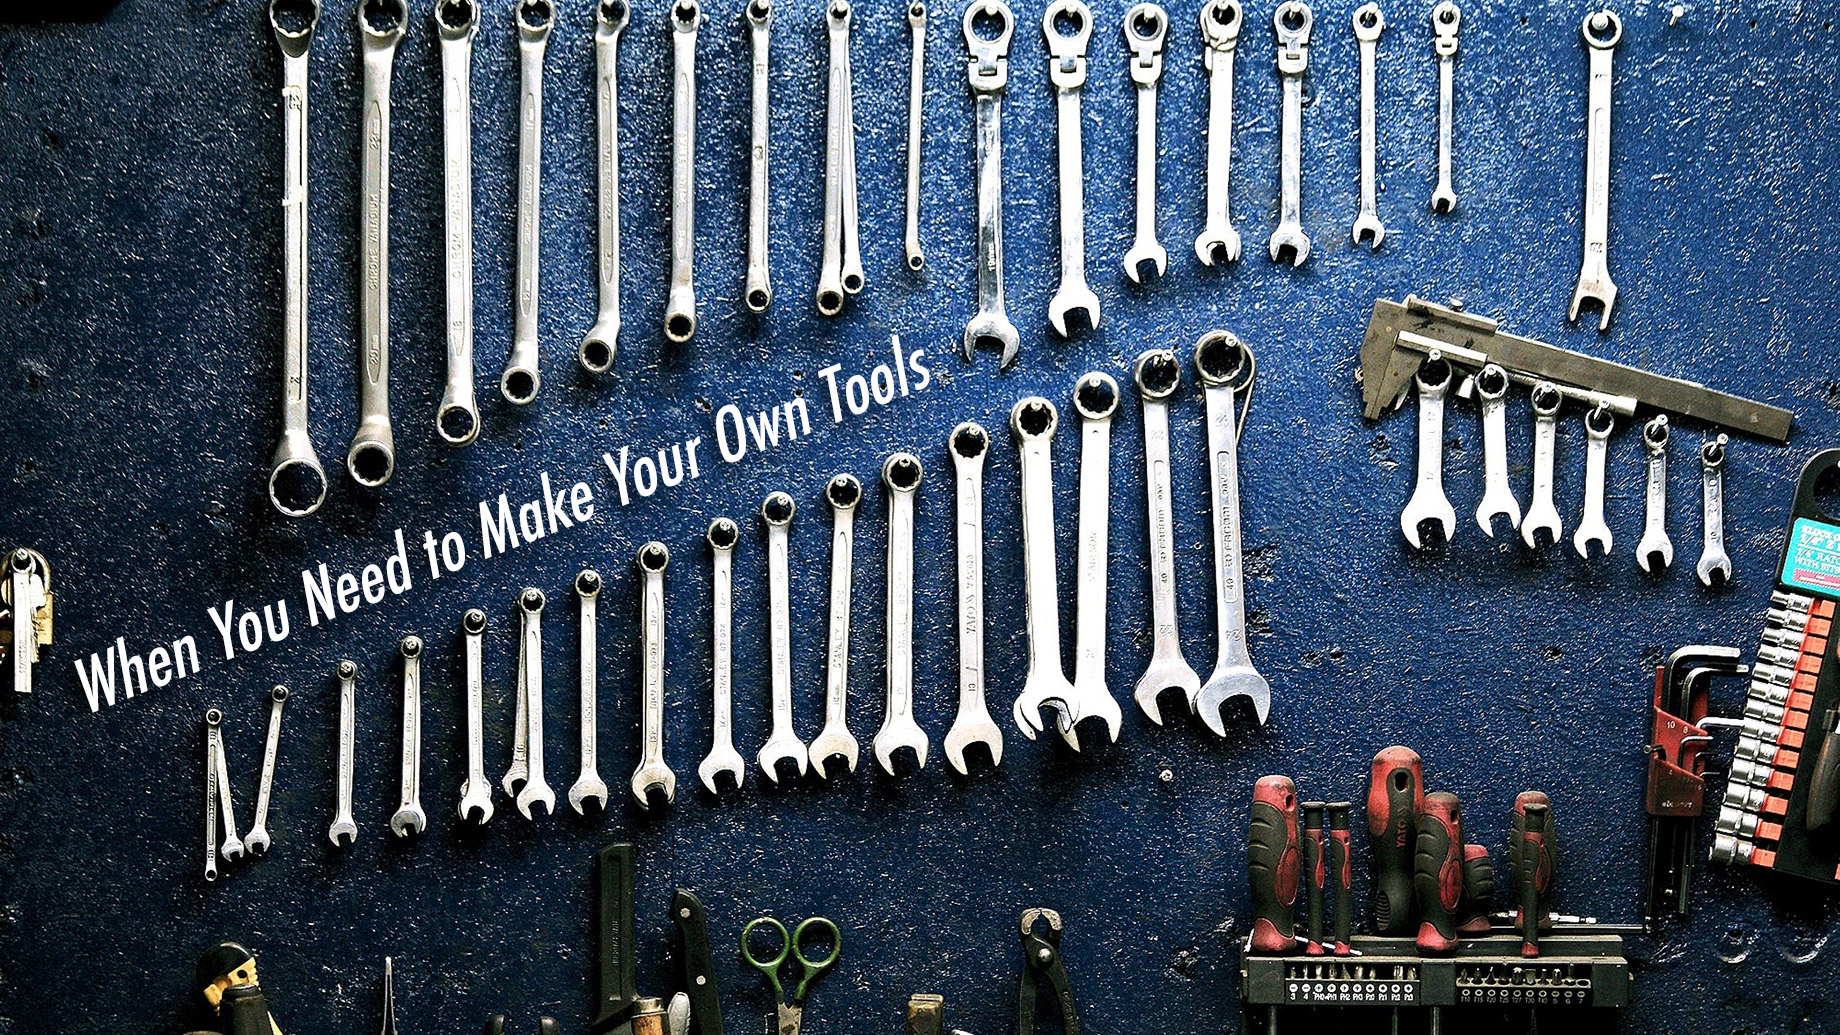 Metal Home Shop Tips - When You Need to Make Your Own Tools